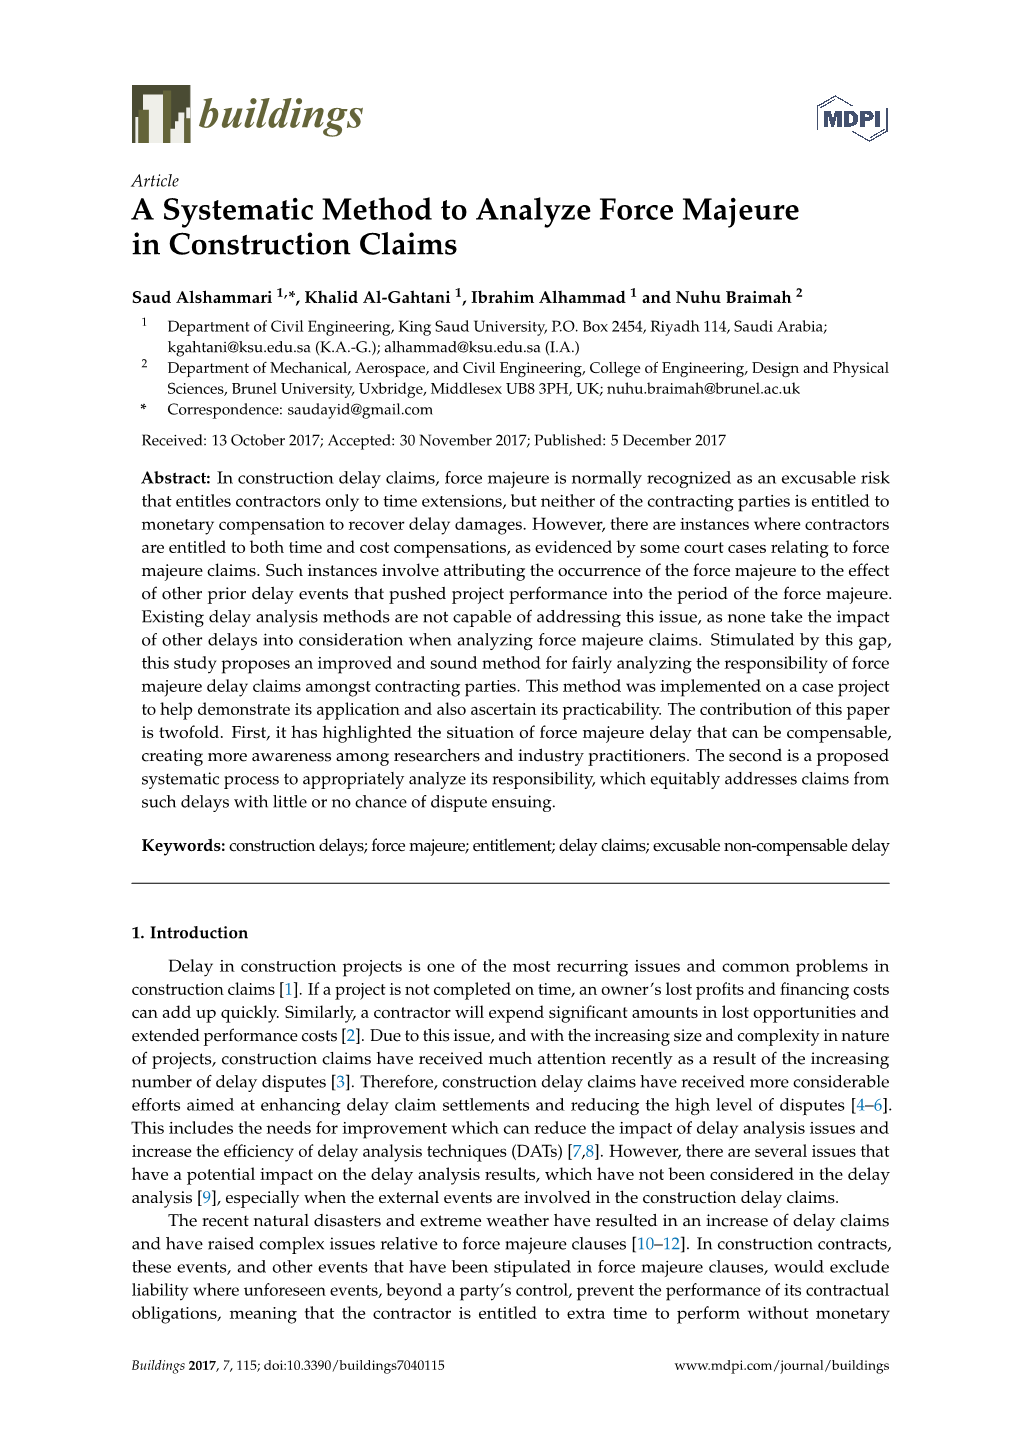 A Systematic Method to Analyze Force Majeure in Construction Claims